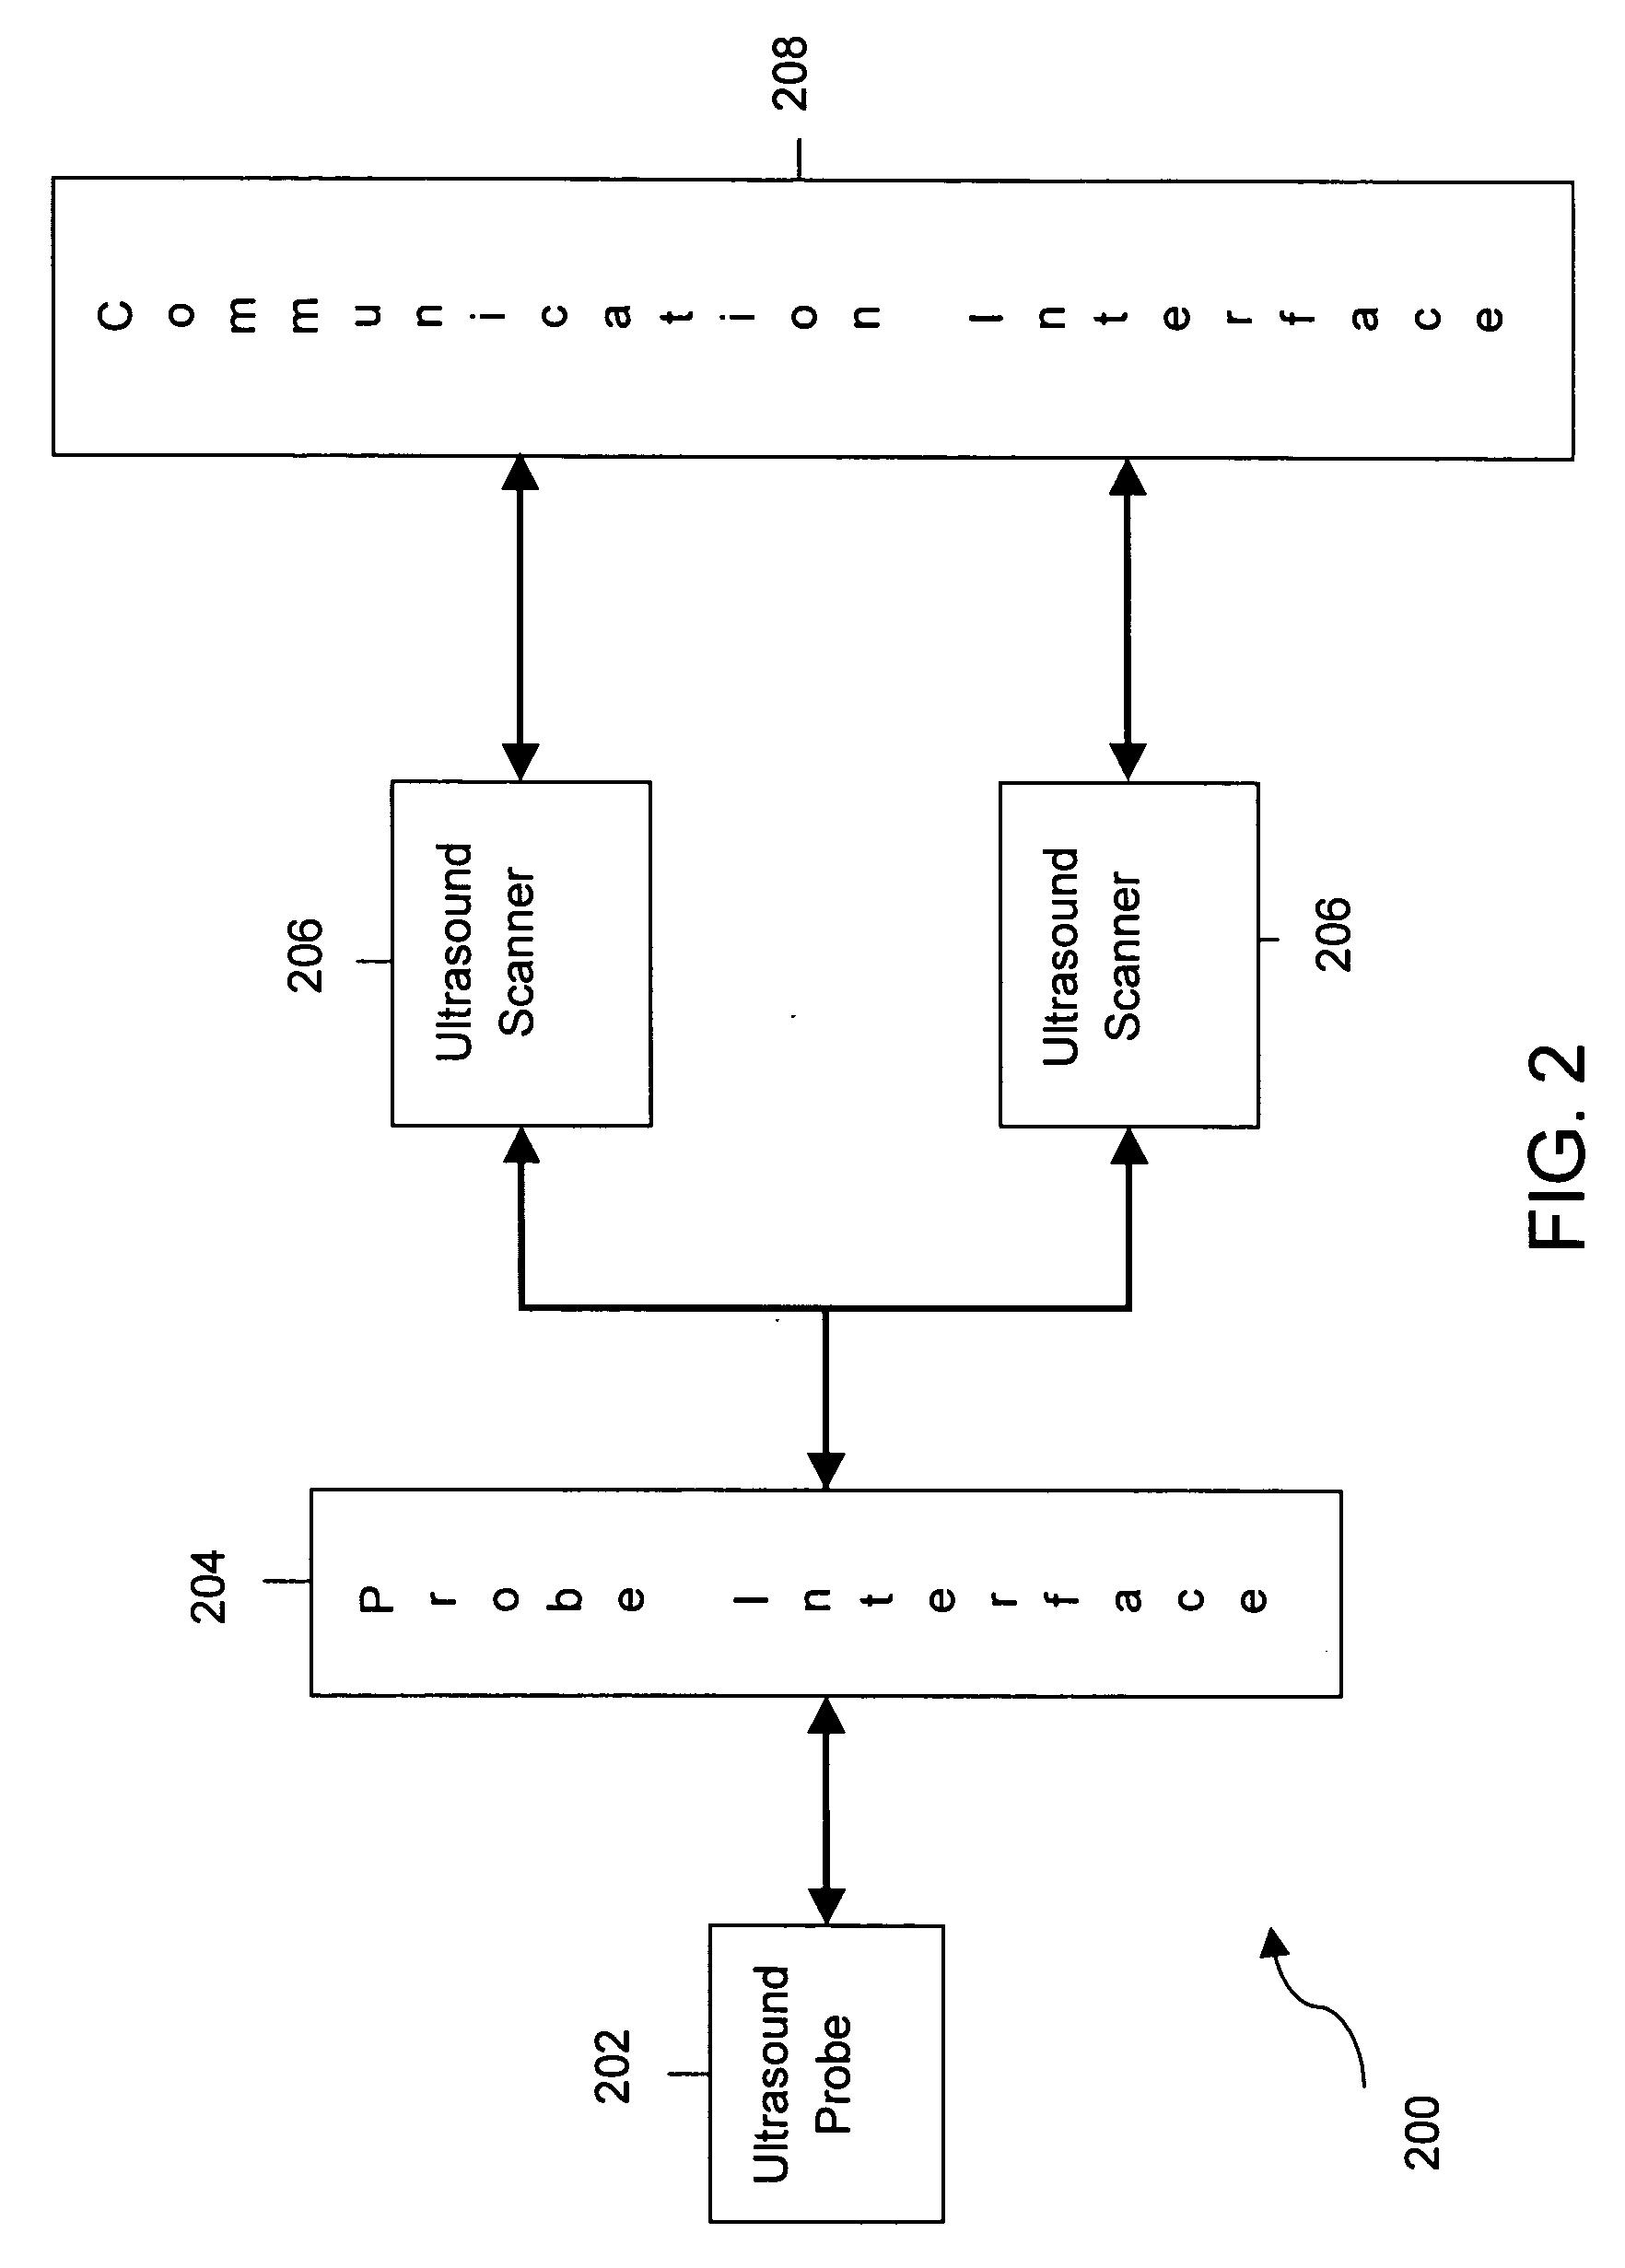 System and method for providing communication between ultrasound scanners